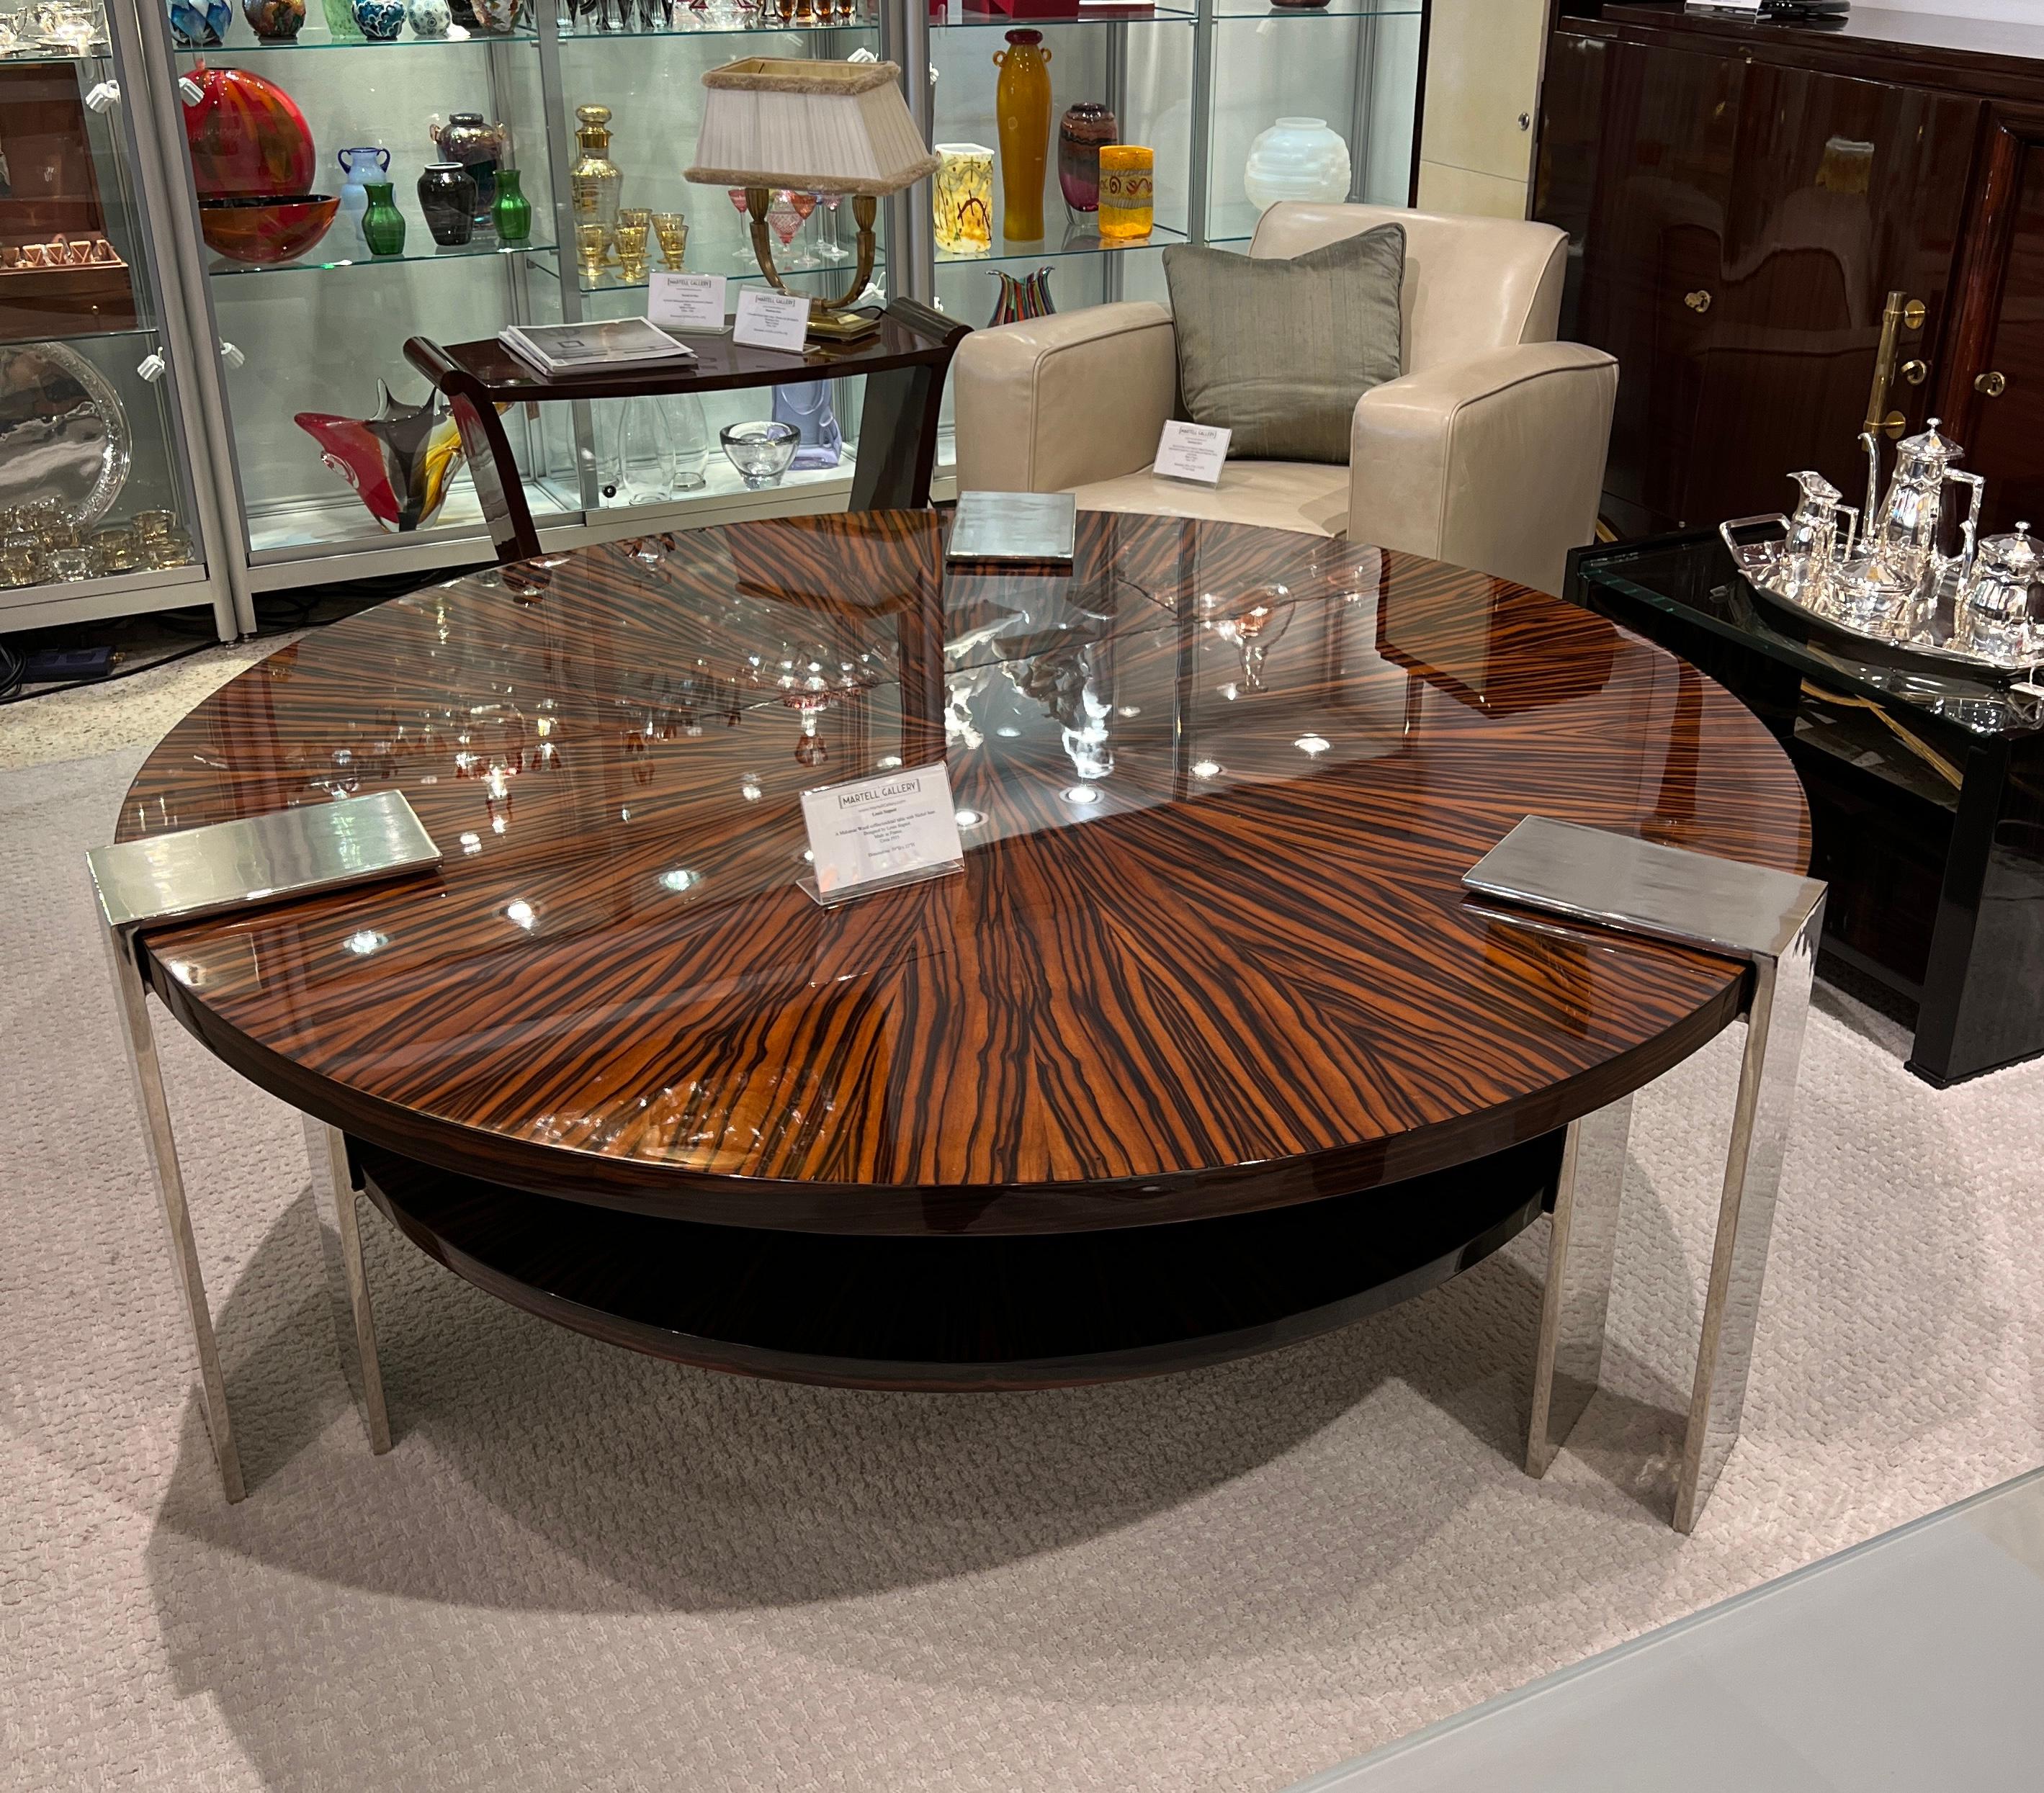 A round coffee/cocktail table with a Soleil Marquetry in Makassar Ebony Wood with a geometric Nickel base.  This table was Made in France in 1935.

Louis Sognot was a French designer and architect who was active during the Art Deco period. During